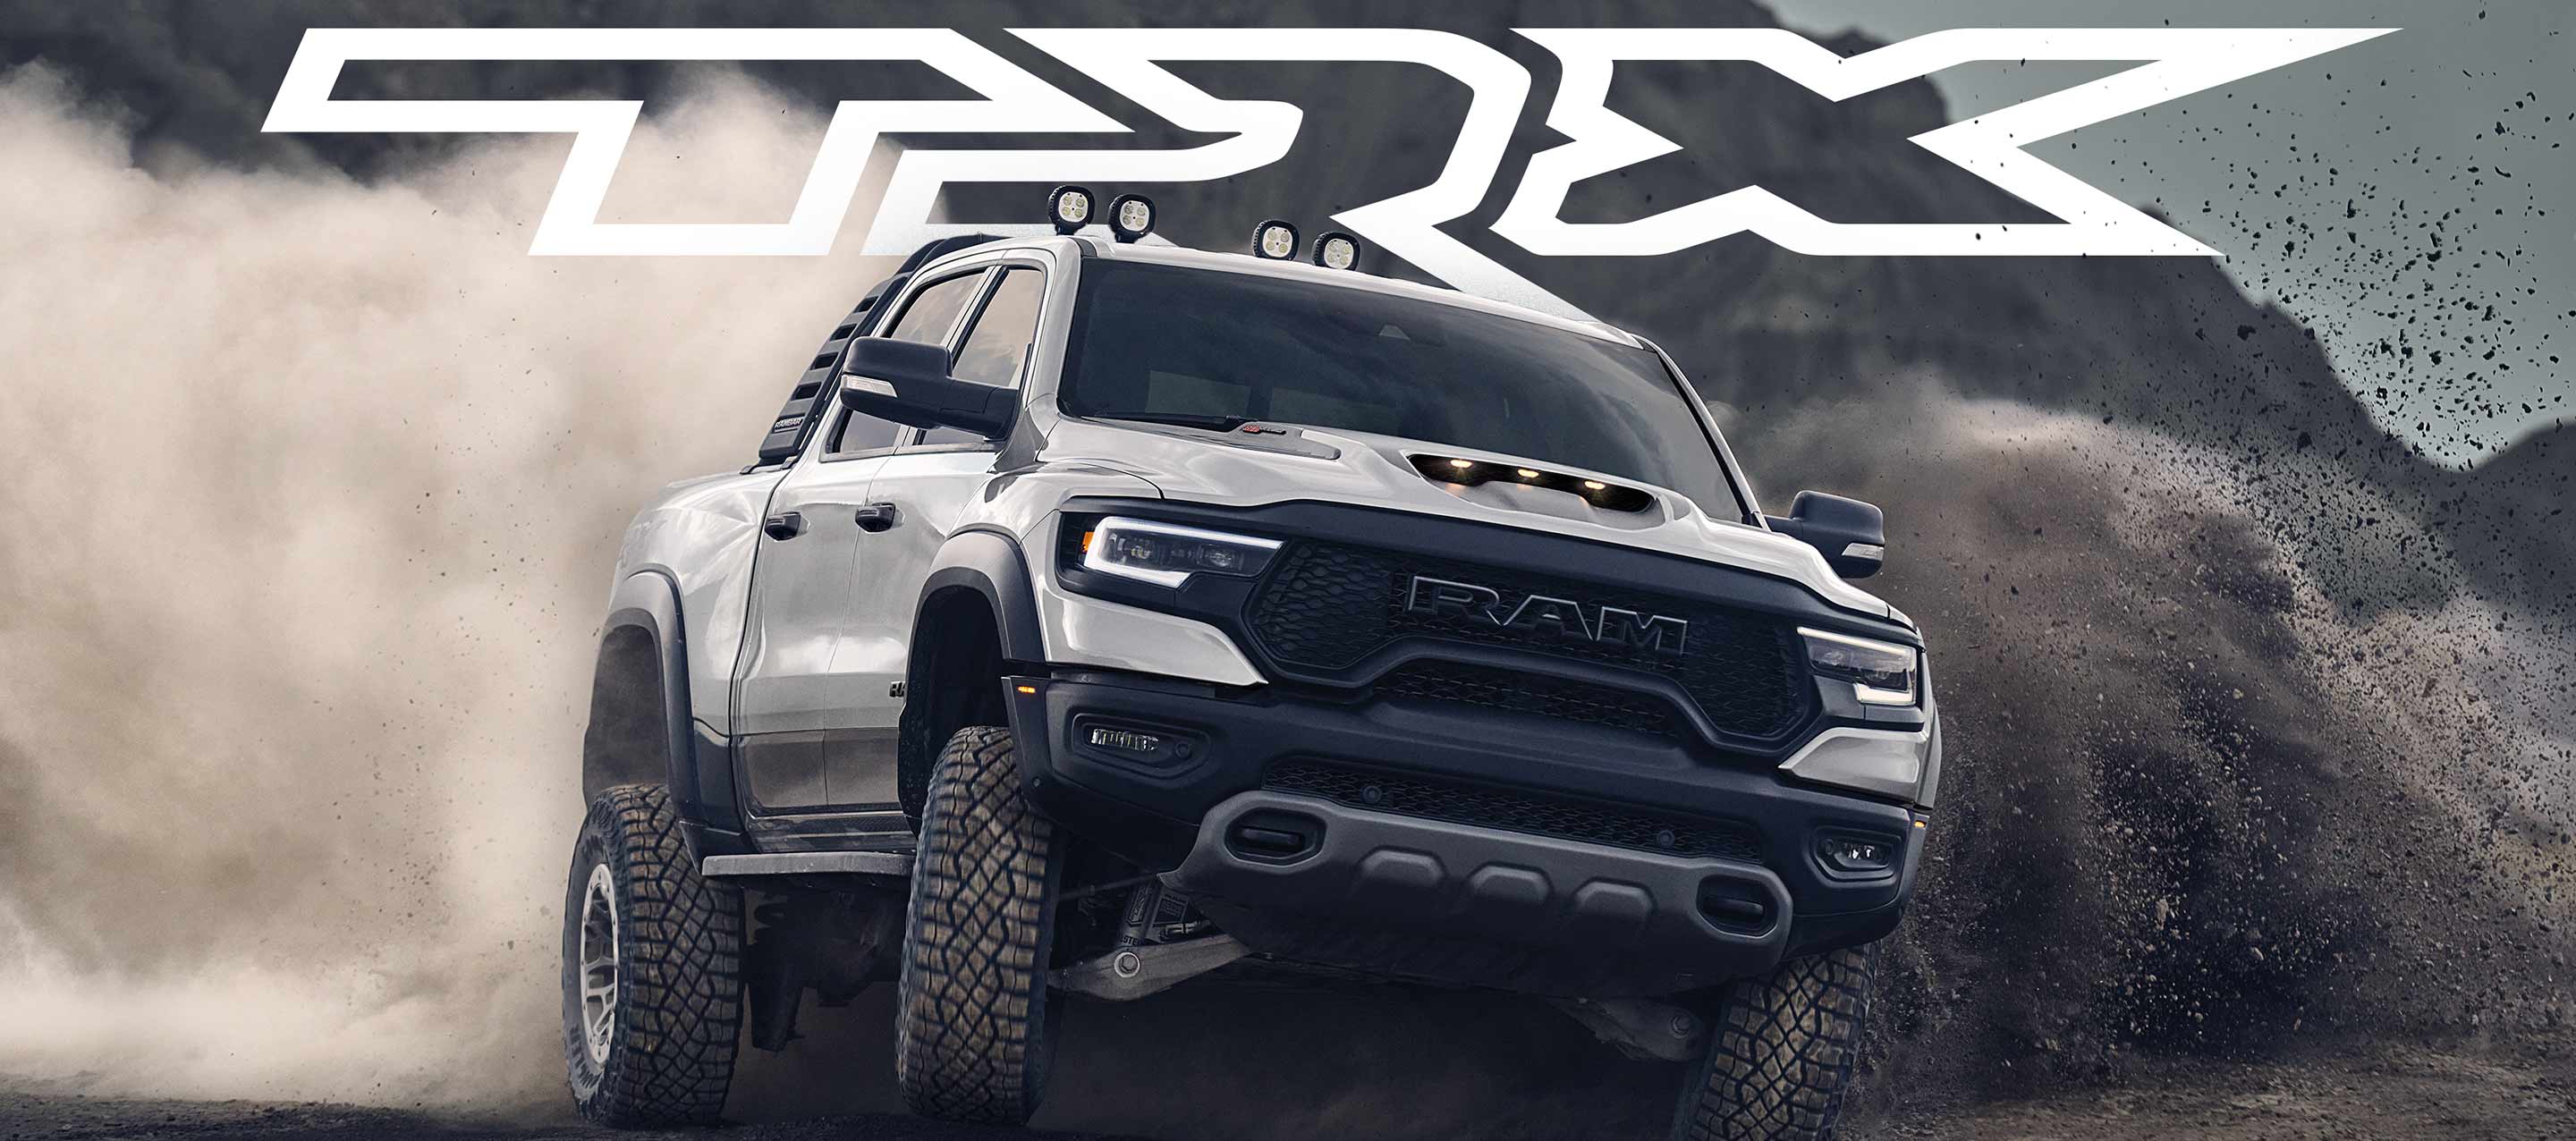 TRX. The 2023 Ram 1500 TRX being driven off-road with a cloud of loose dirt being churned up from its wheels.